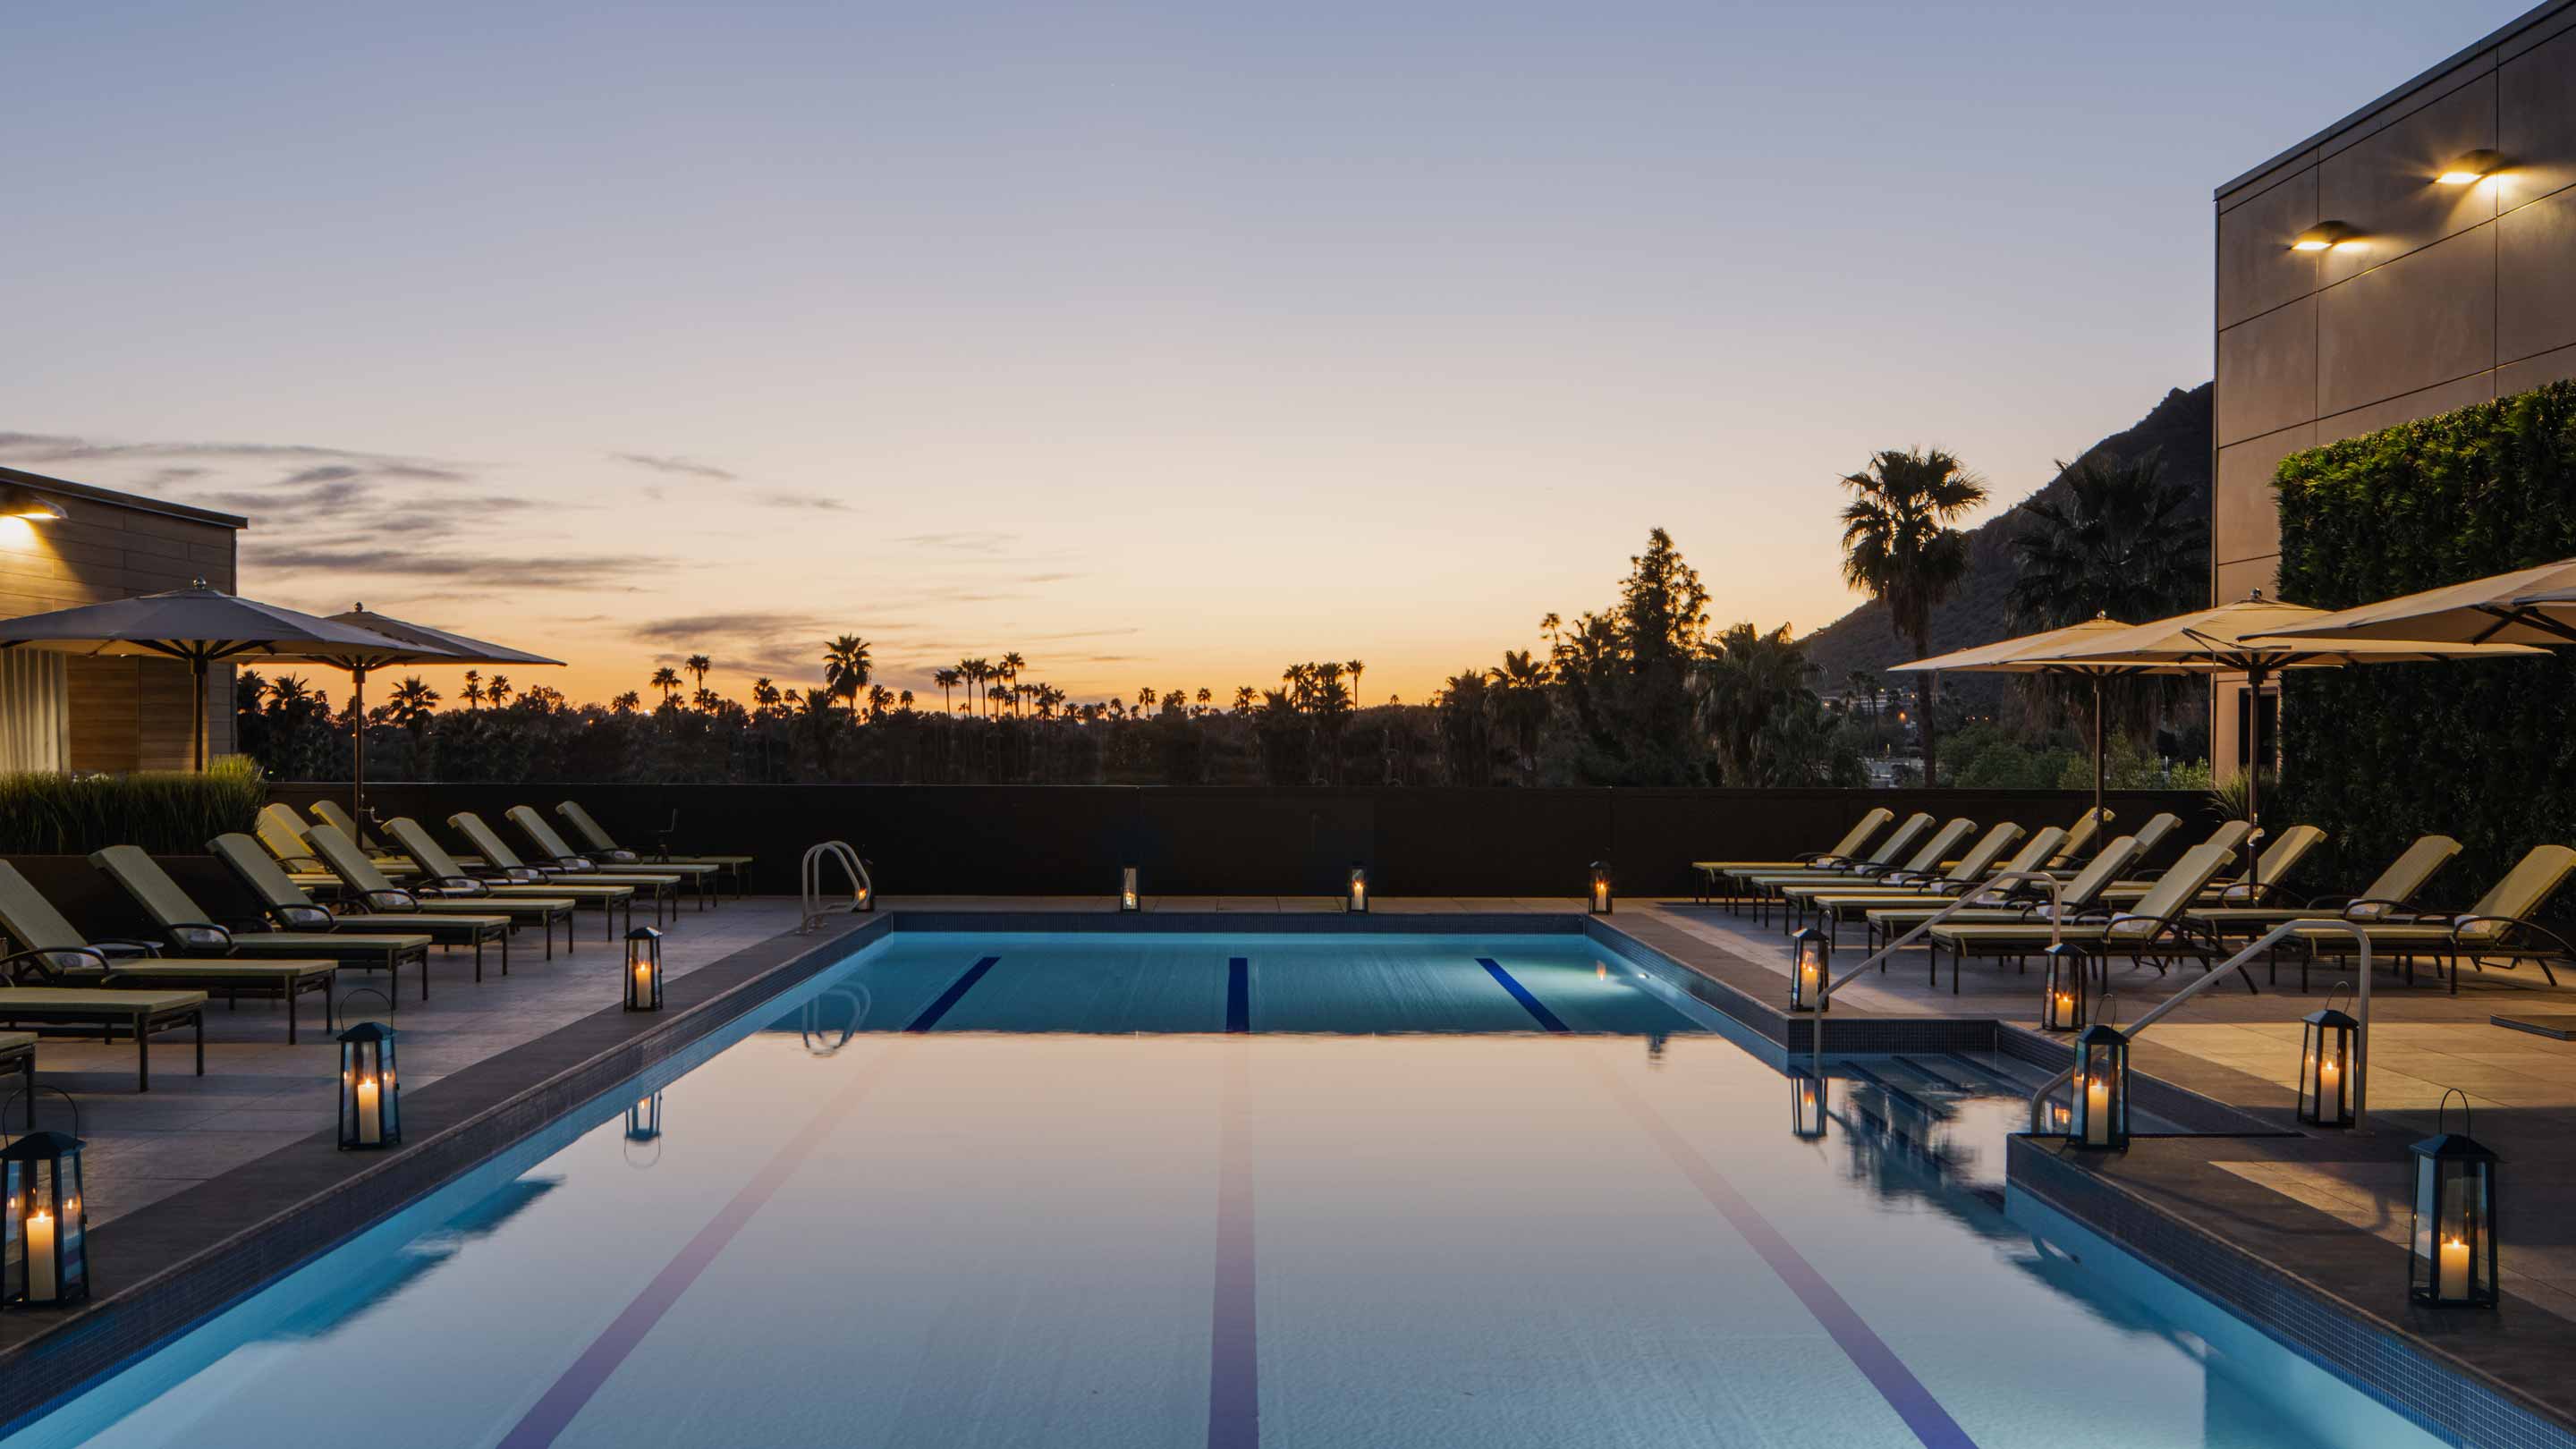 A 3 lane pool, surrounded by lounge chairs, at dusk